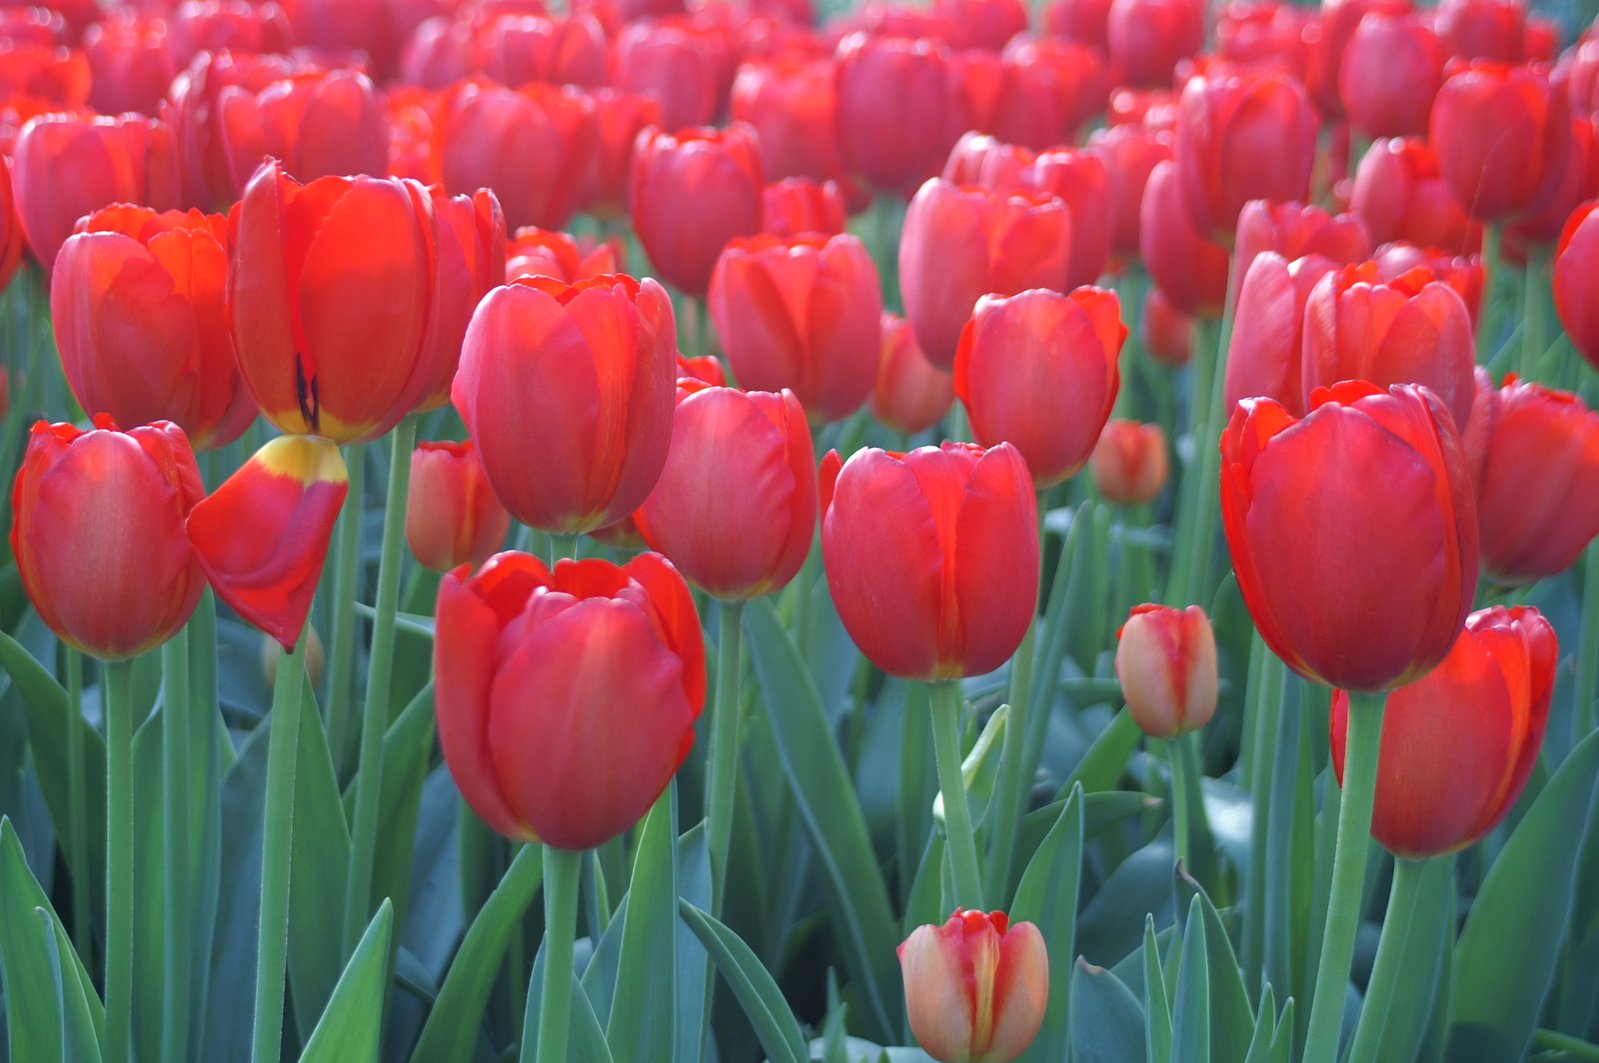 the field of red tulips are in full bloom